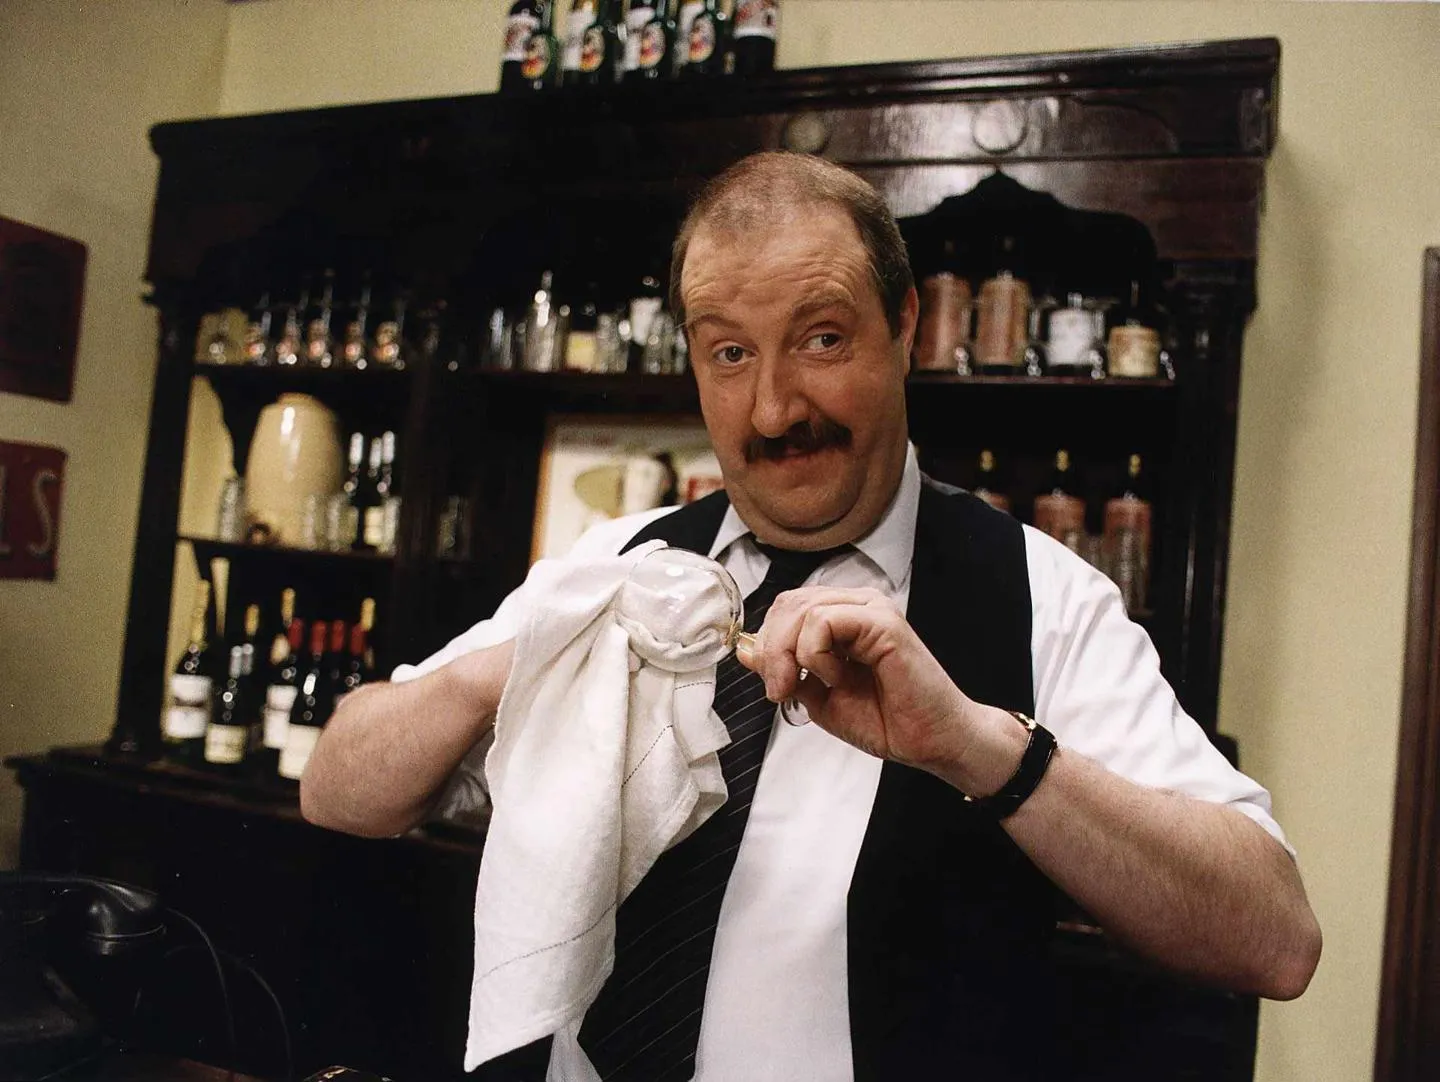 Actor Gorden Kaye looks at the camera dressed as Rene Artois, the bar owner in BBC TV comedy series 'Allo 'Allo